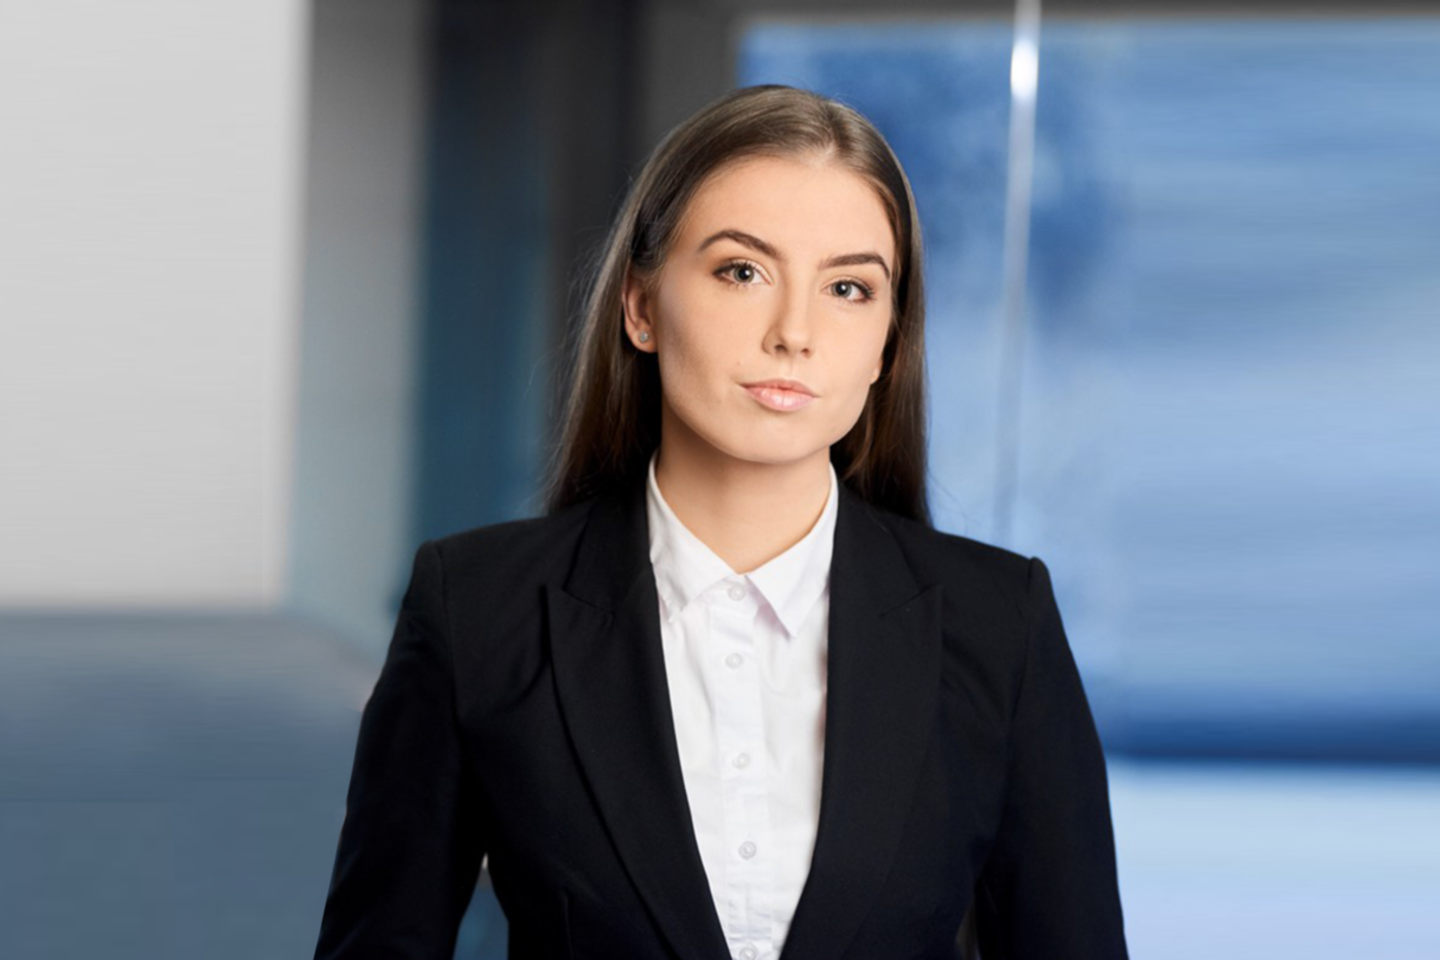 Monika Ubavičiūtė, Associate, Assistant Attorney-at-law at Marger law firm.